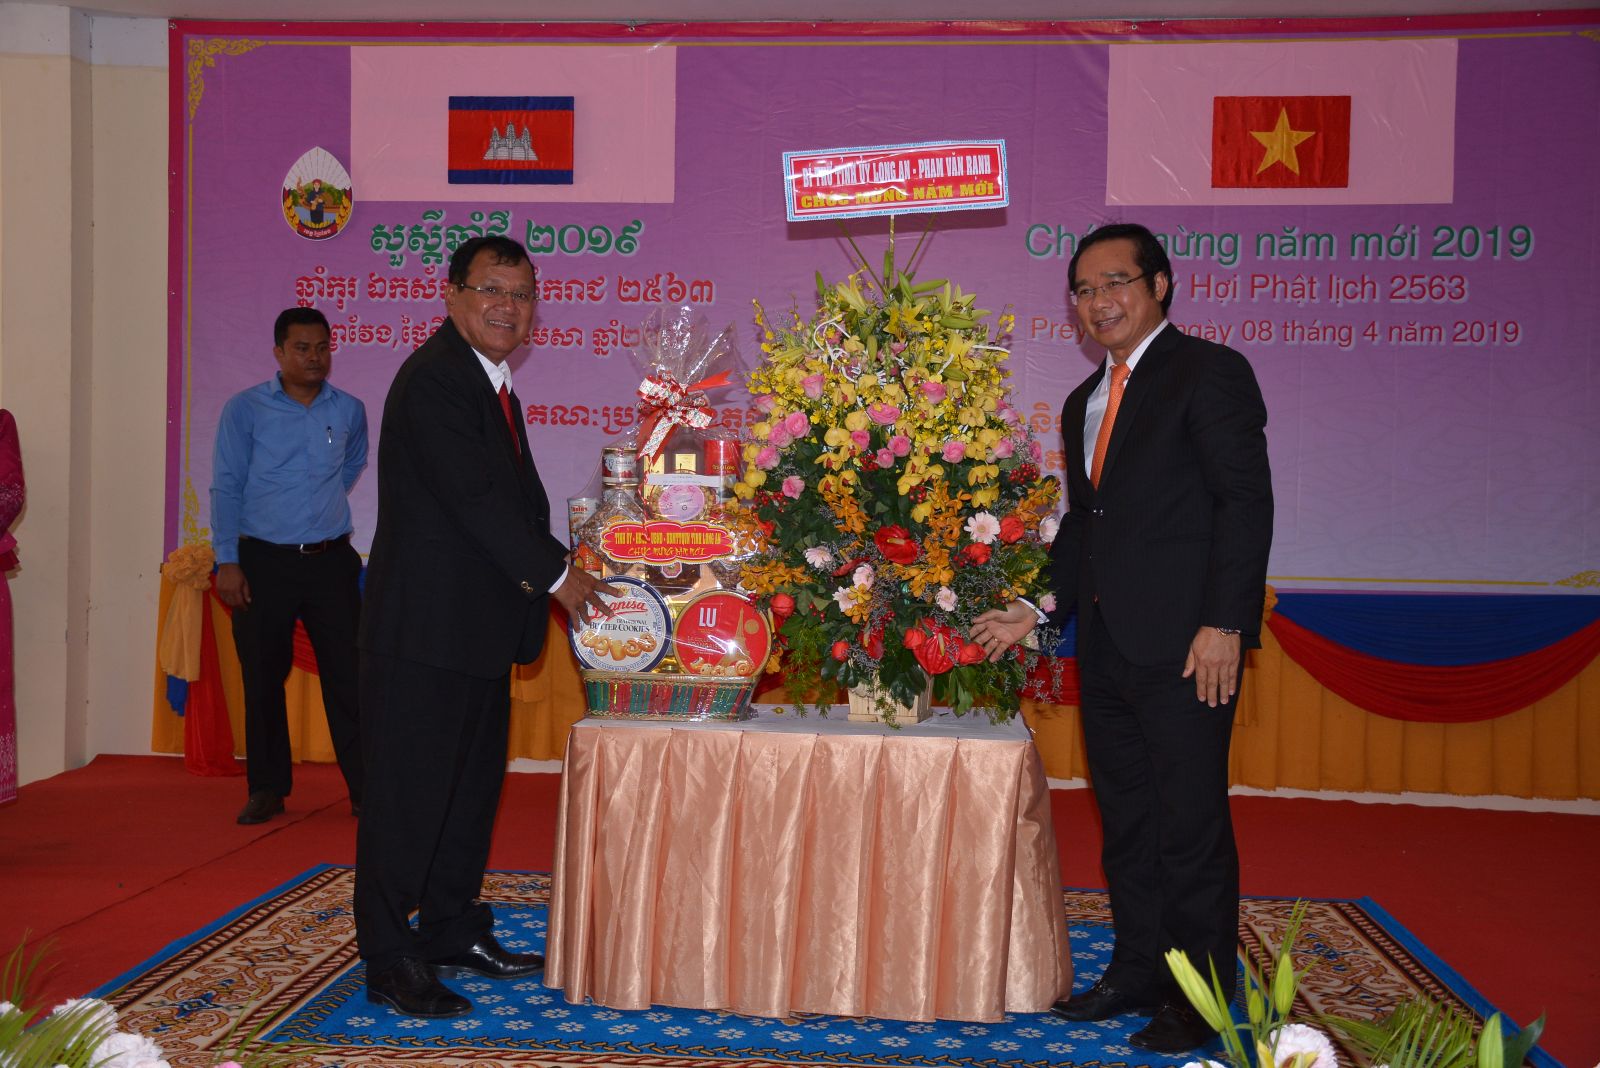 Deputy Secretary of Provincial Party Committee, Vice Chairman of Long An Provincial People's Committee - Nguyen Van Duoc (right) gave a gift to the Chairman of Prey Veng Provincial Council - S’Bong Sorat